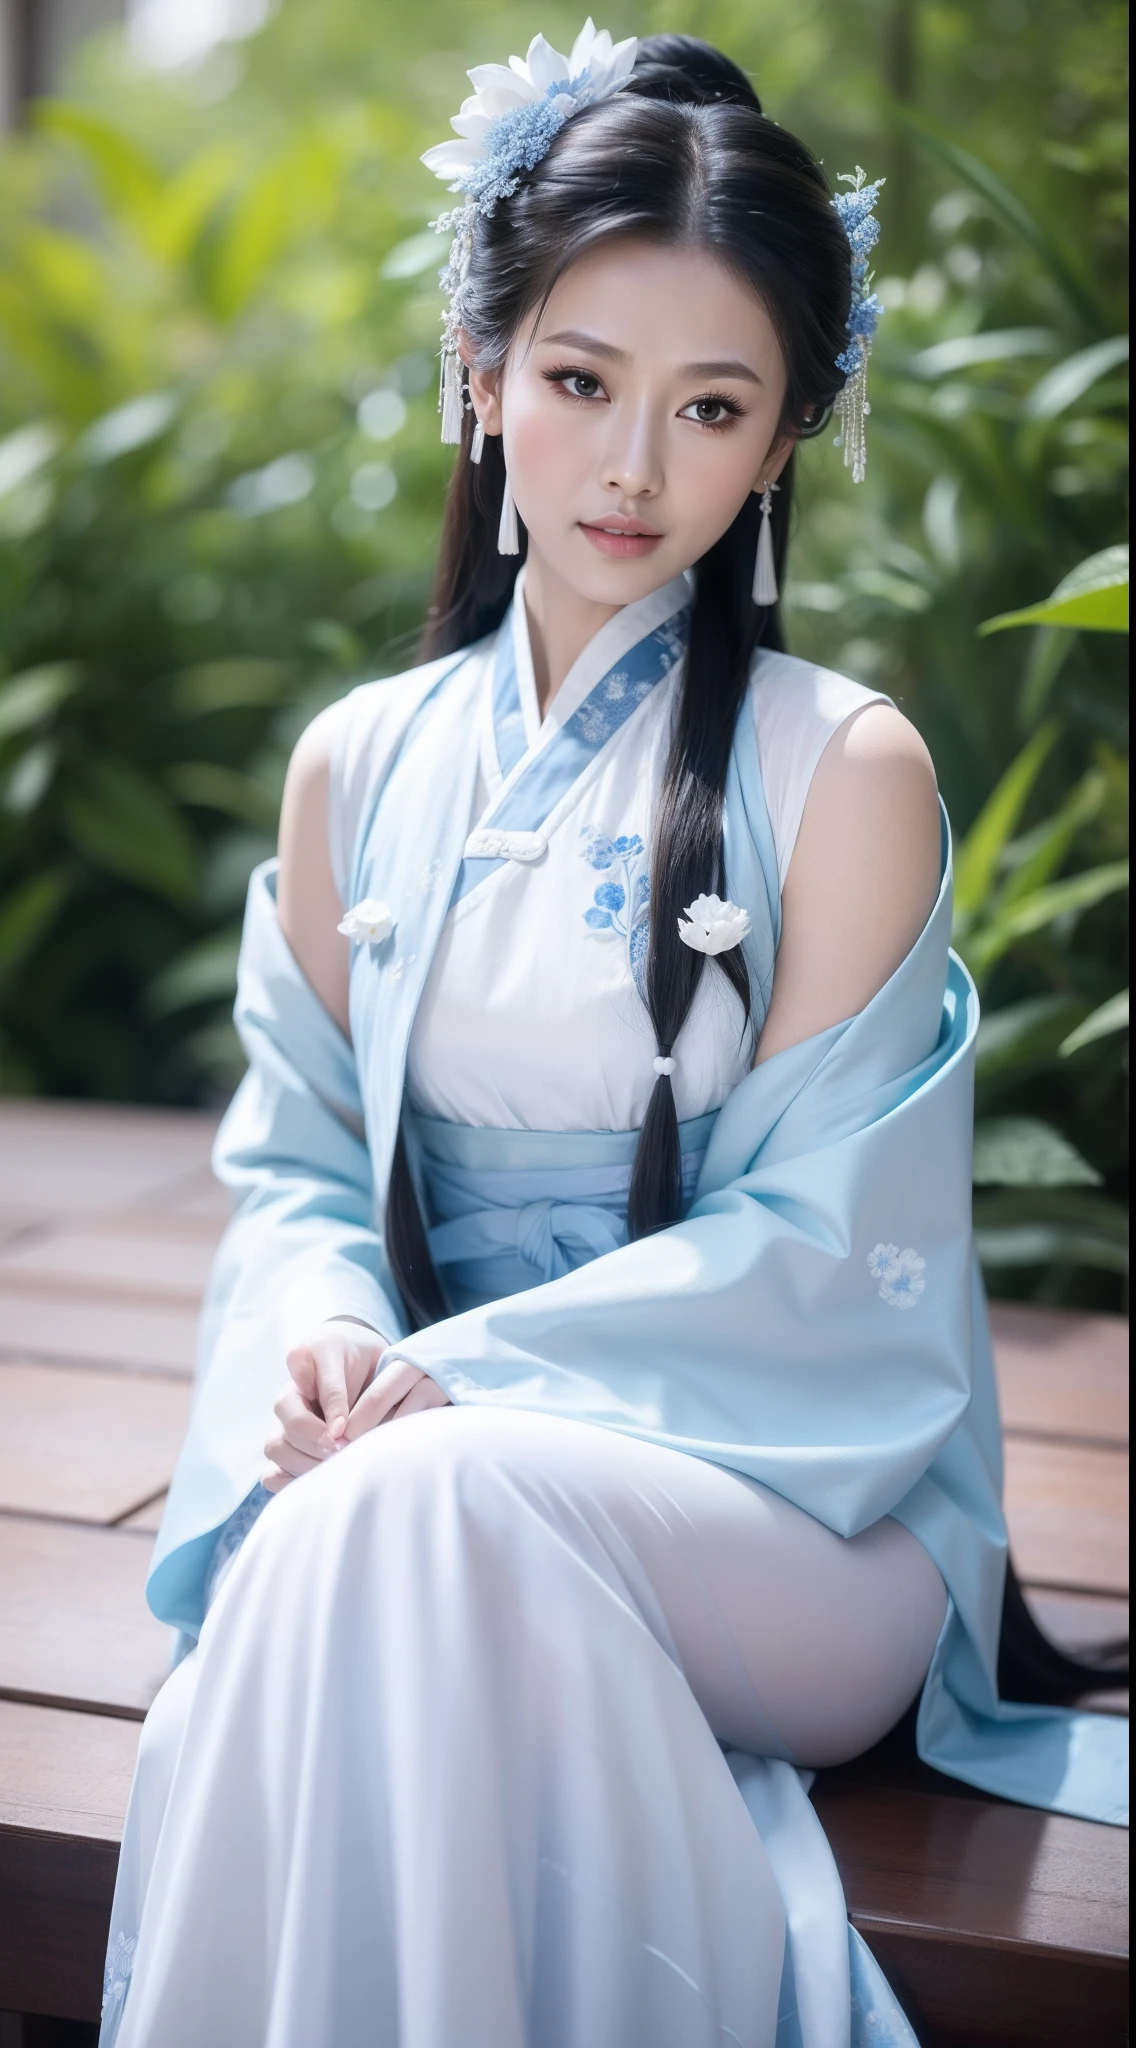 Blue and white porcelain style，Ancient Chinese clothing，The clothing is blue and white motif，ancient china art style，Fashion model 18 years old [[[[closeup cleavage]]]], [[[[boobgasm]]]], [[[[coll]]]], [[[[bshoulders]]]], perfect  eyes, Perfect iris，Perfect lips，perfect teeth，Perfect skin，with fair skin，Soft front light，hdr，Movie girl，long whitr hair，The expression was melancholy，The background is outdoor，White powder wall，Light blue flowers，4K Ultra HD, Ultra-high resolution, (Photorealistic: 1.4), Best quality，Masterpiece，Utra dilution，（pastel colour：1.2）